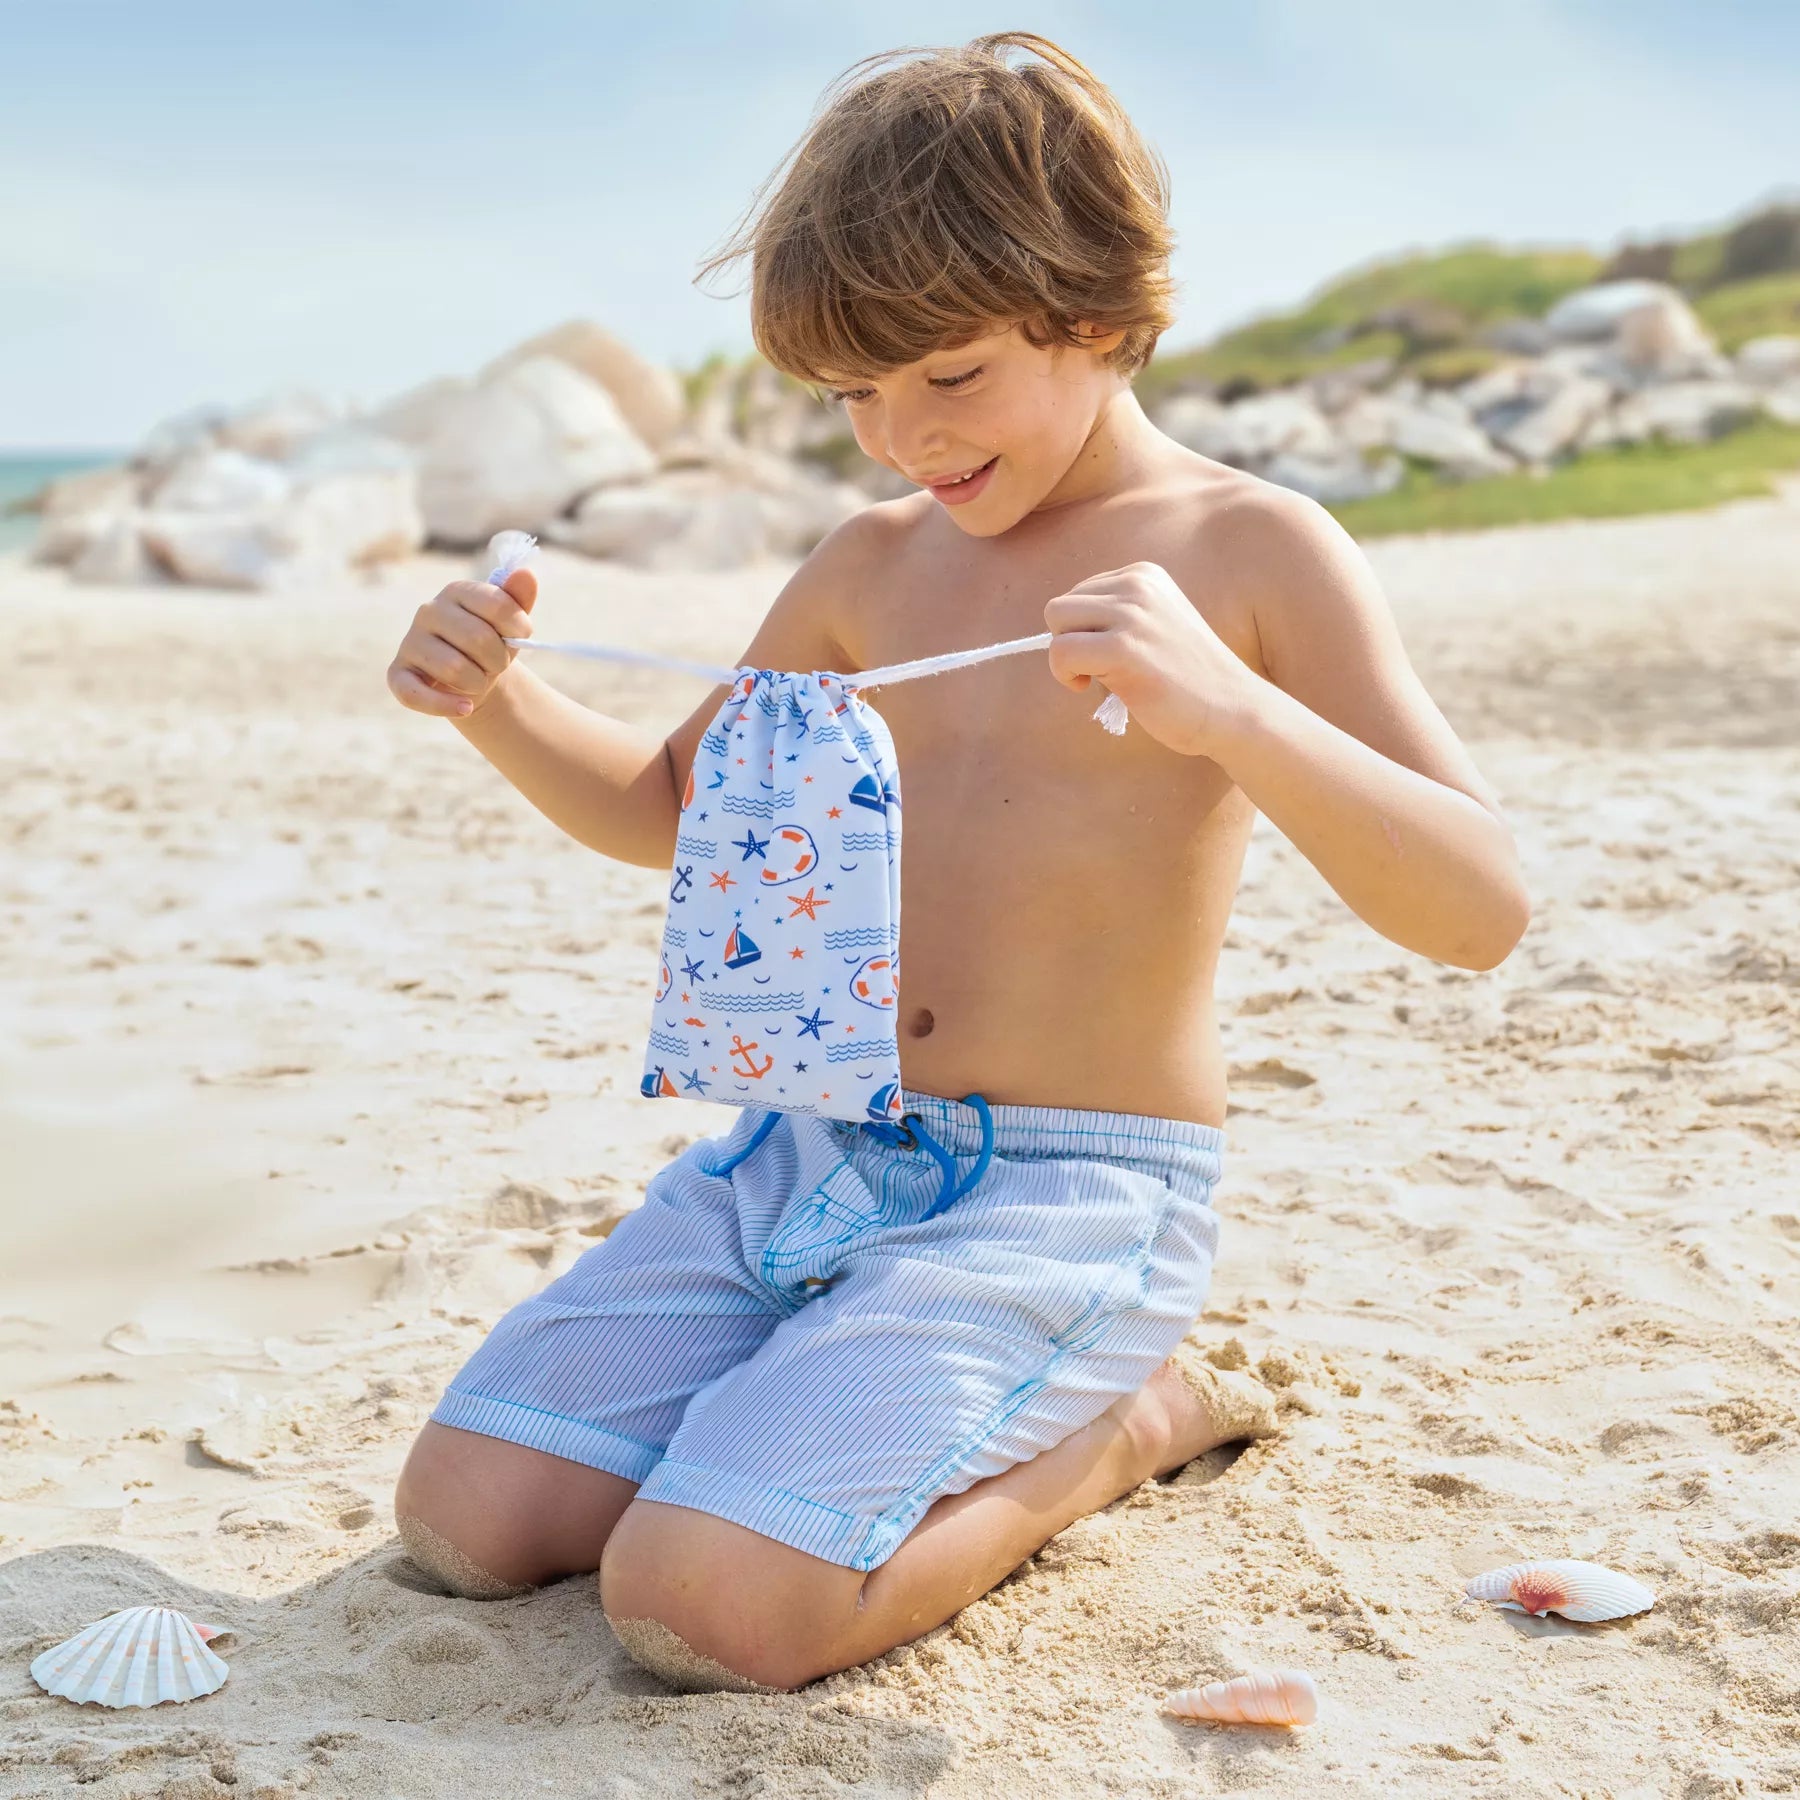 A boy holding a Quick Dry, Sand Free, Light Weight, Compact and Ecofriendly Microfiber Beach Towel pouch from La Toalla